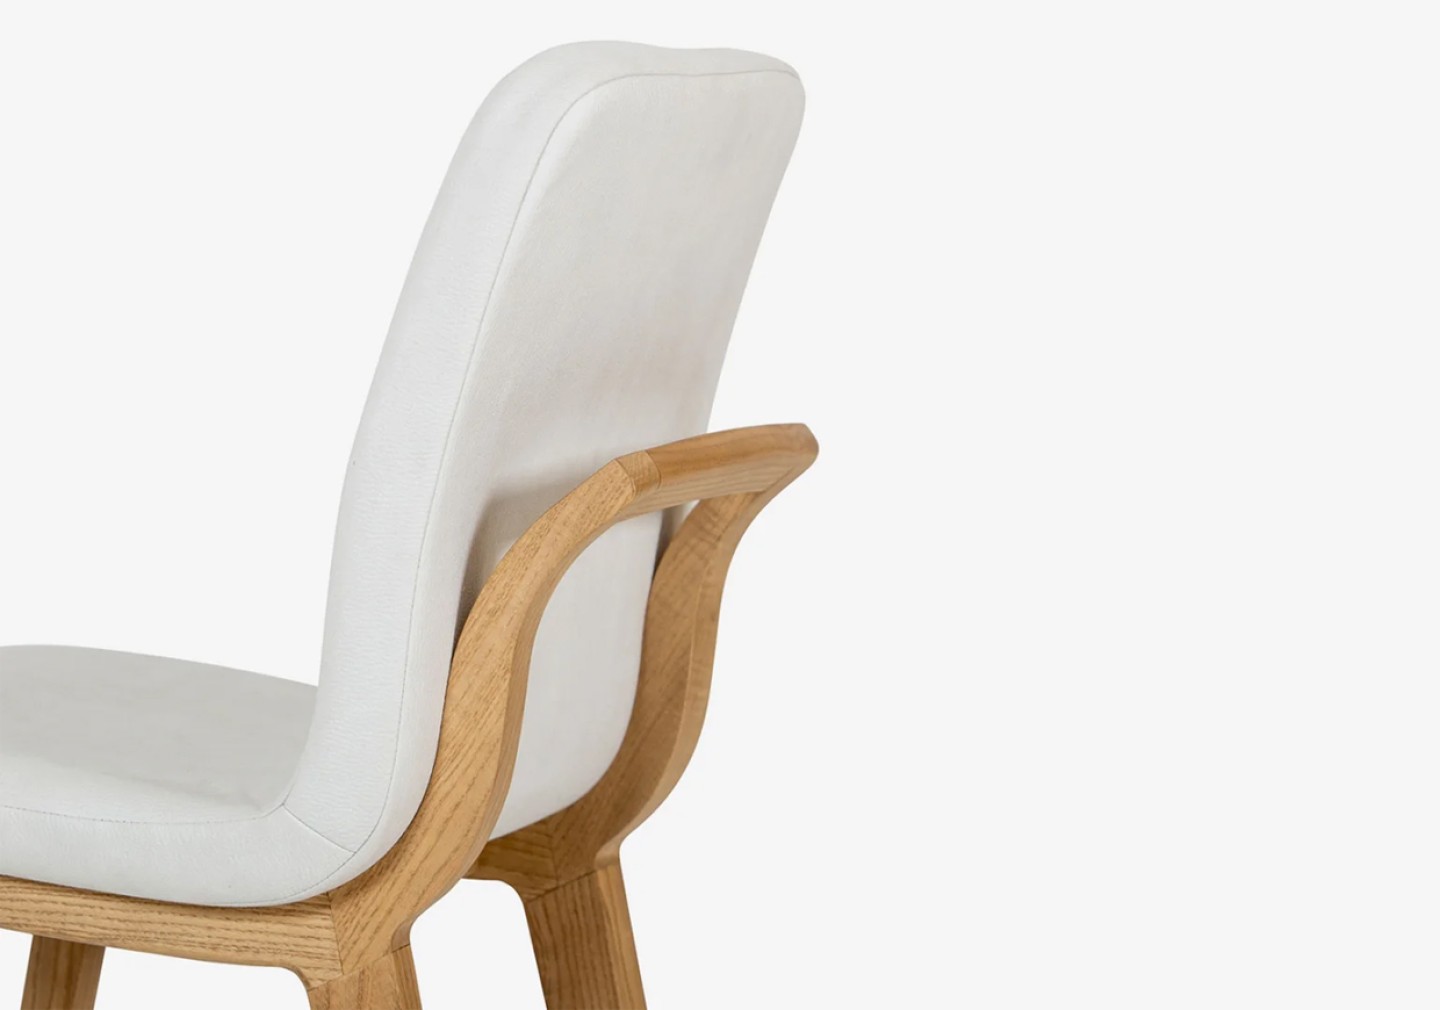 THE BRACE DINING CHAIR